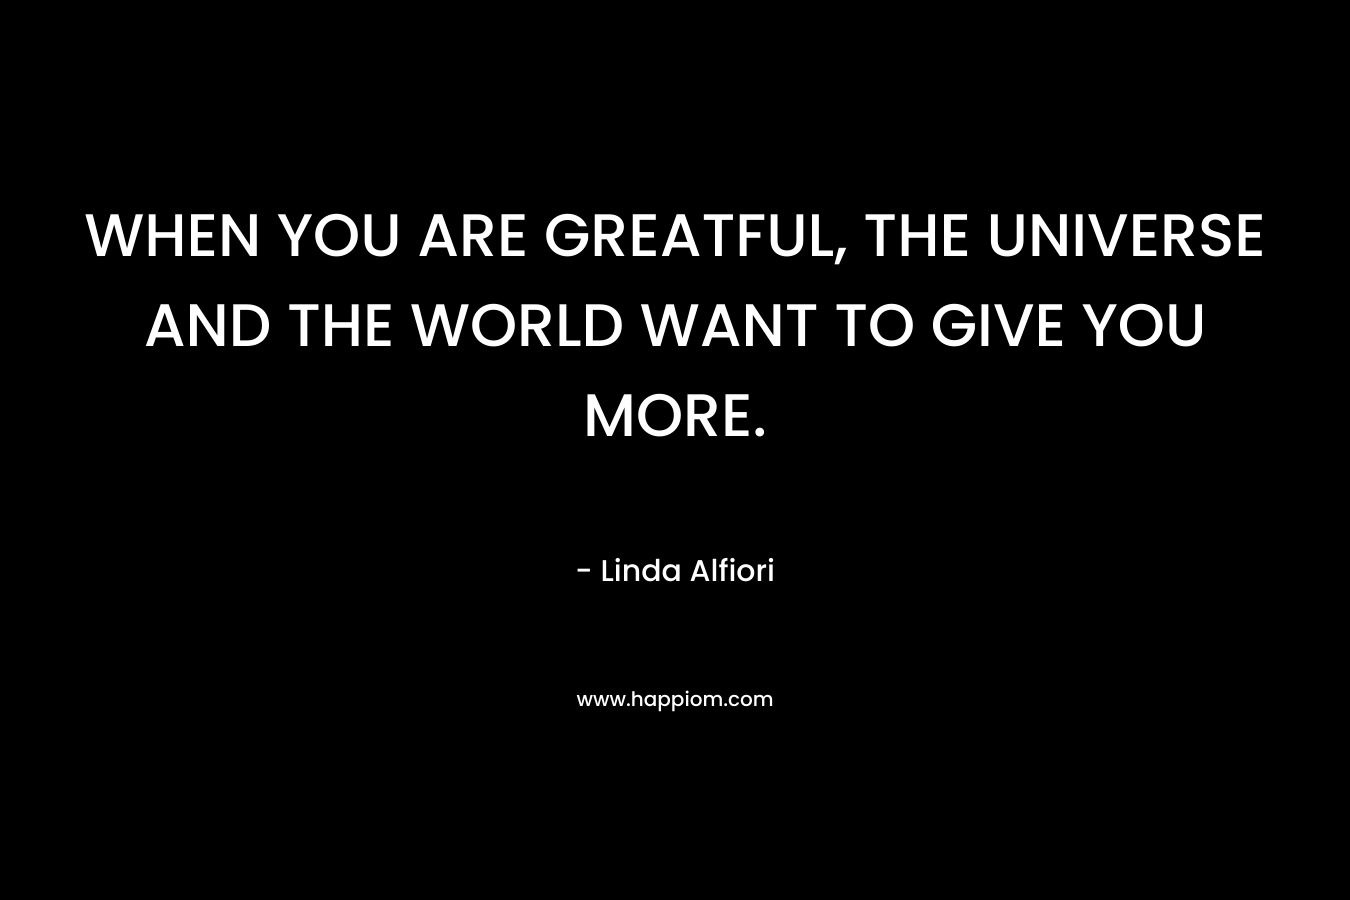 WHEN YOU ARE GREATFUL, THE UNIVERSE AND THE WORLD WANT TO GIVE YOU MORE.